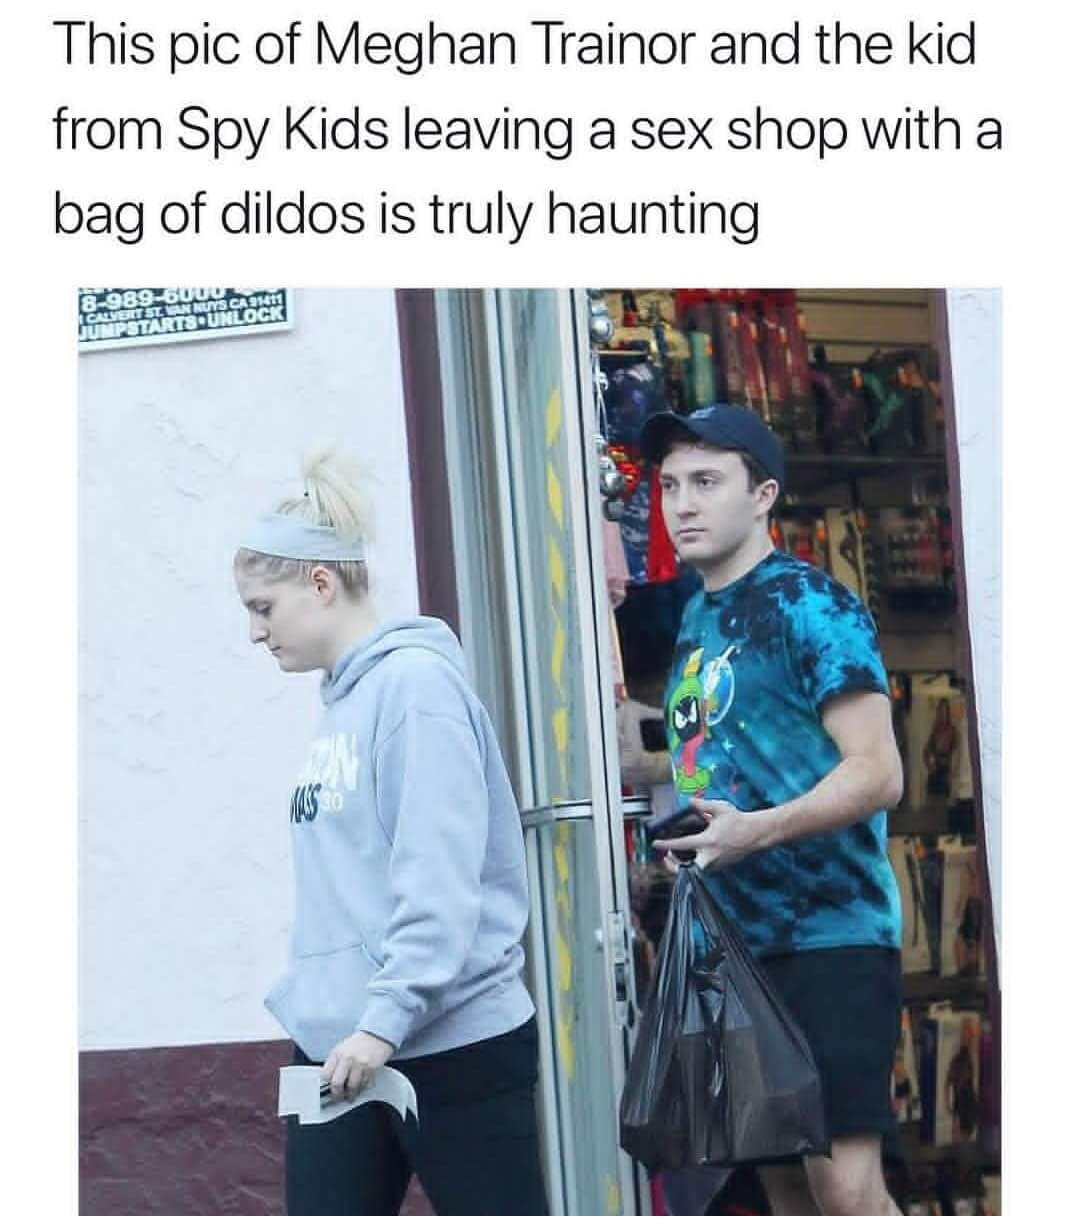 meghan trainor sex shop - This pic of Meghan Trainor and the kid from Spy Kids leaving a sex shop with a bag of dildos is truly haunting 896000 Sit St Nruntsc